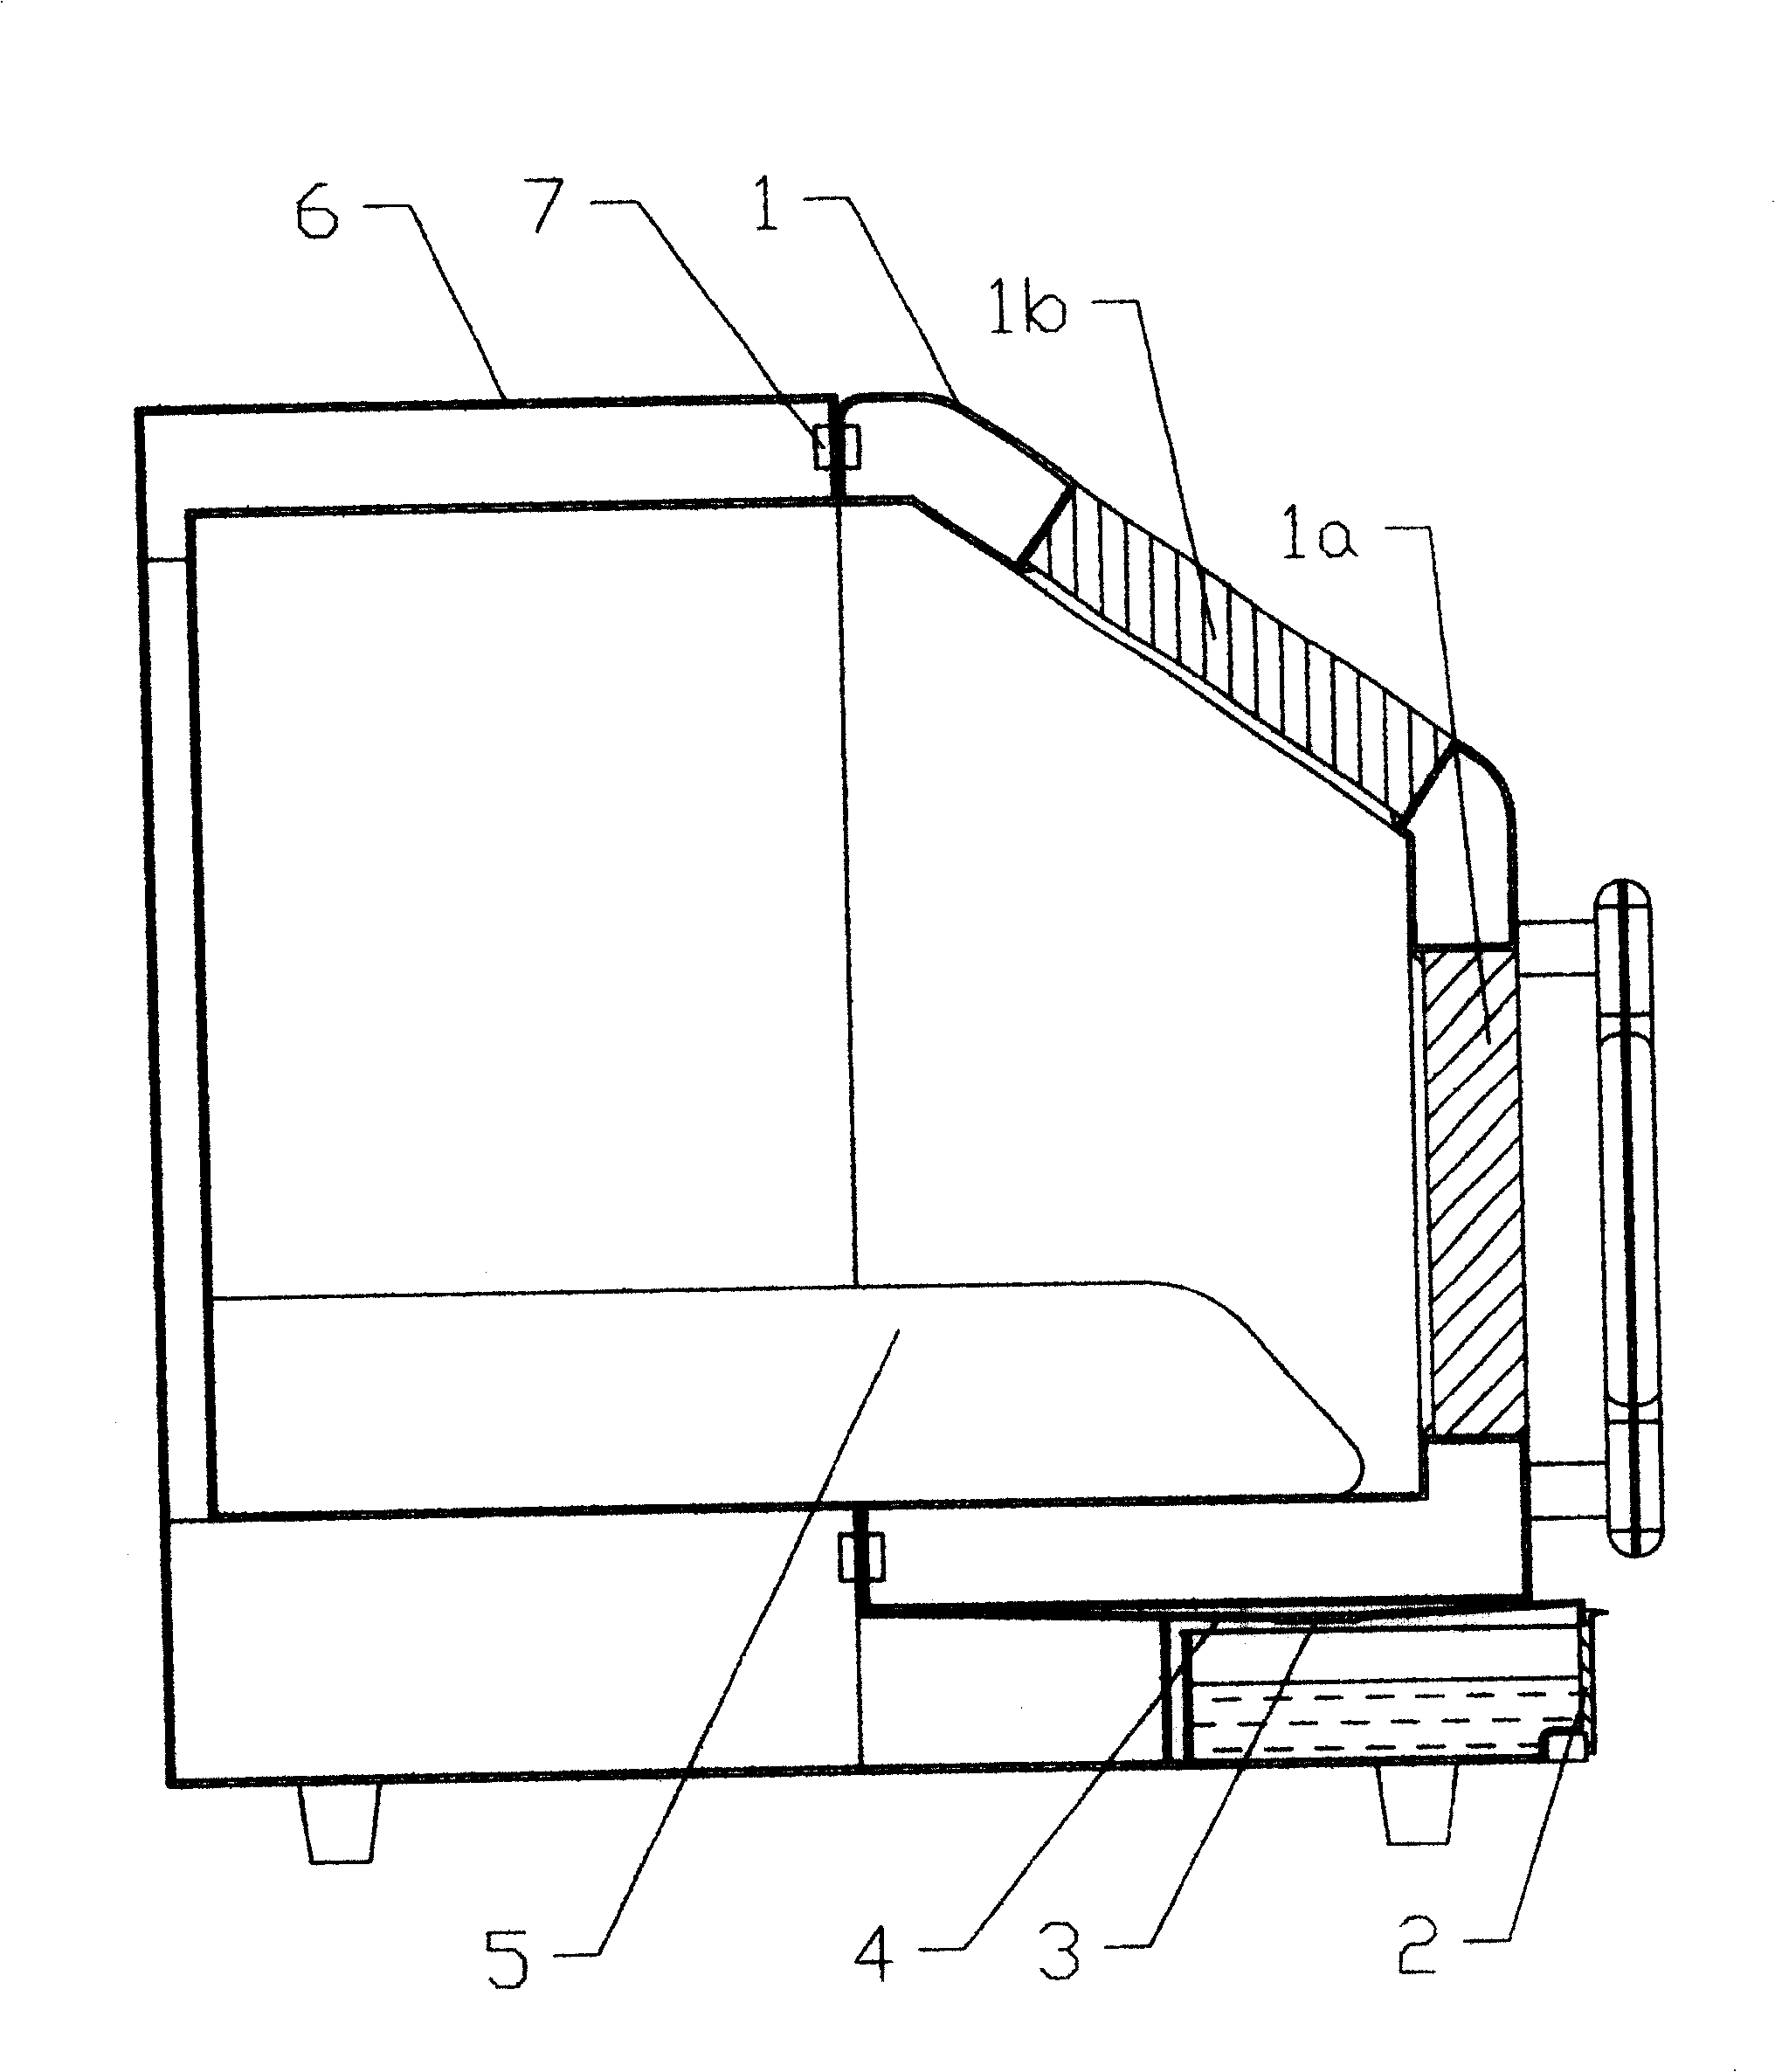 Enclosed chamber of electromagnetic oven and double observation windows oven door thereof